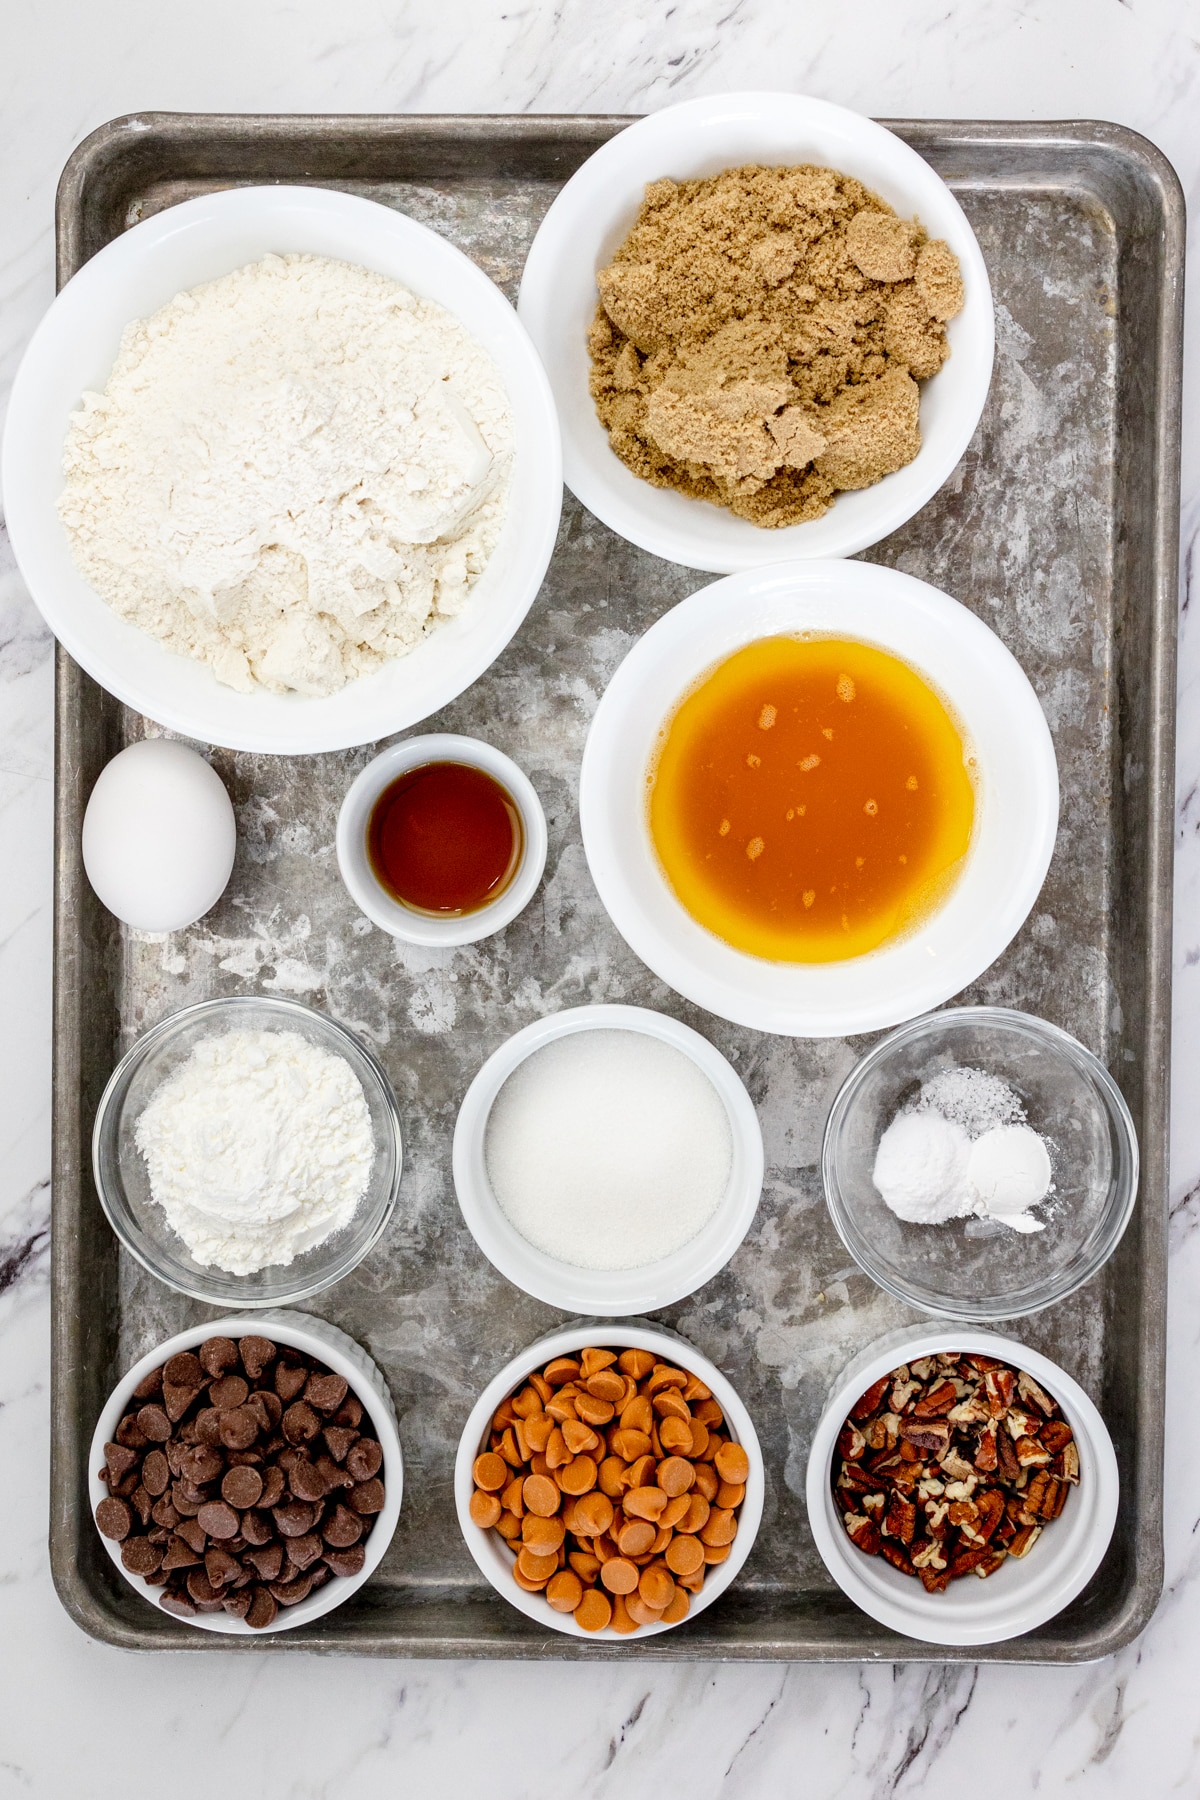 Ingredients for Butterscotch Chocolate Chip Cookies Recipe.